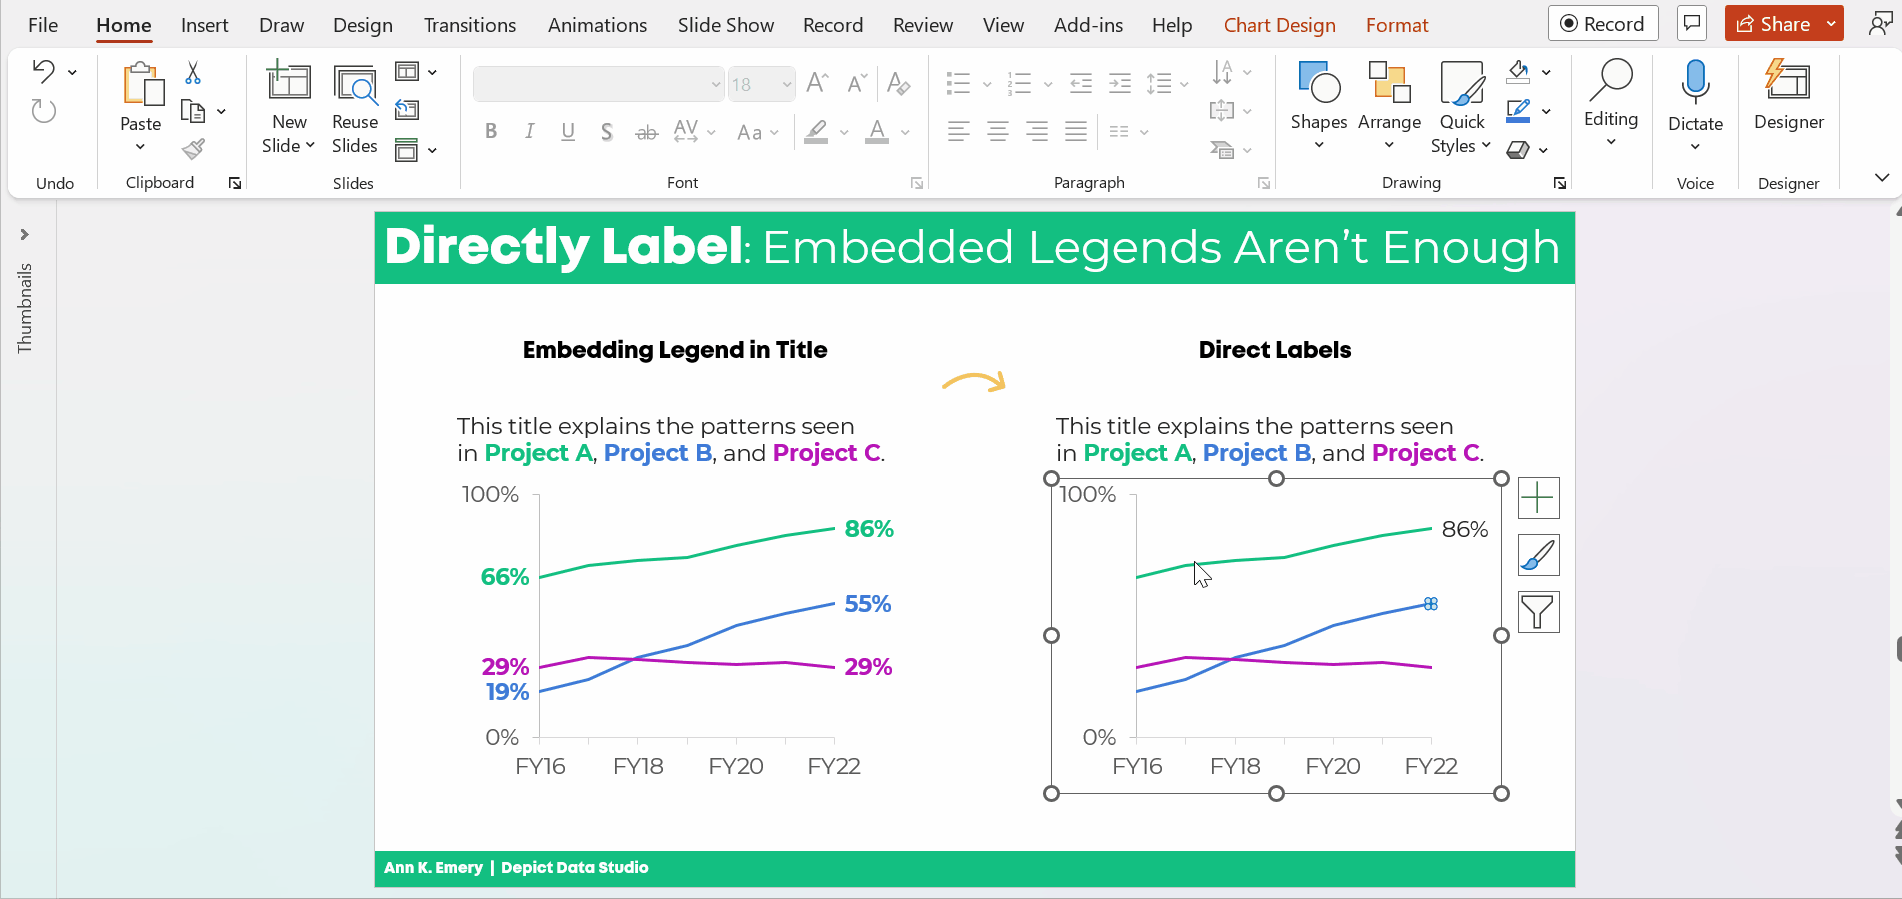 Ann K. Emery's GIF showing you how to directly label your line graphs in Microsoft Excel.